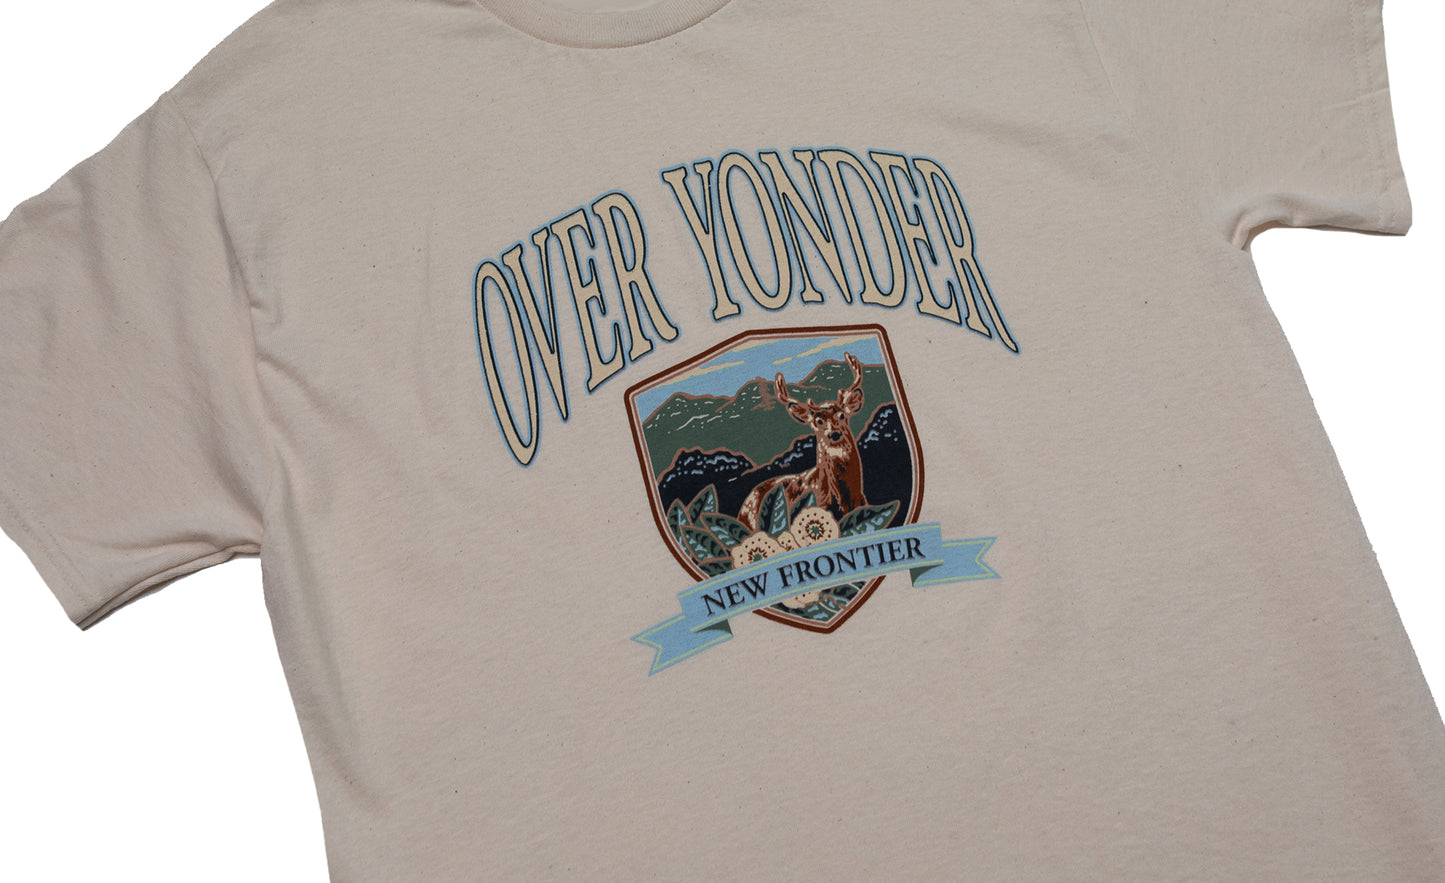 Over Yonder Tee (Natural)